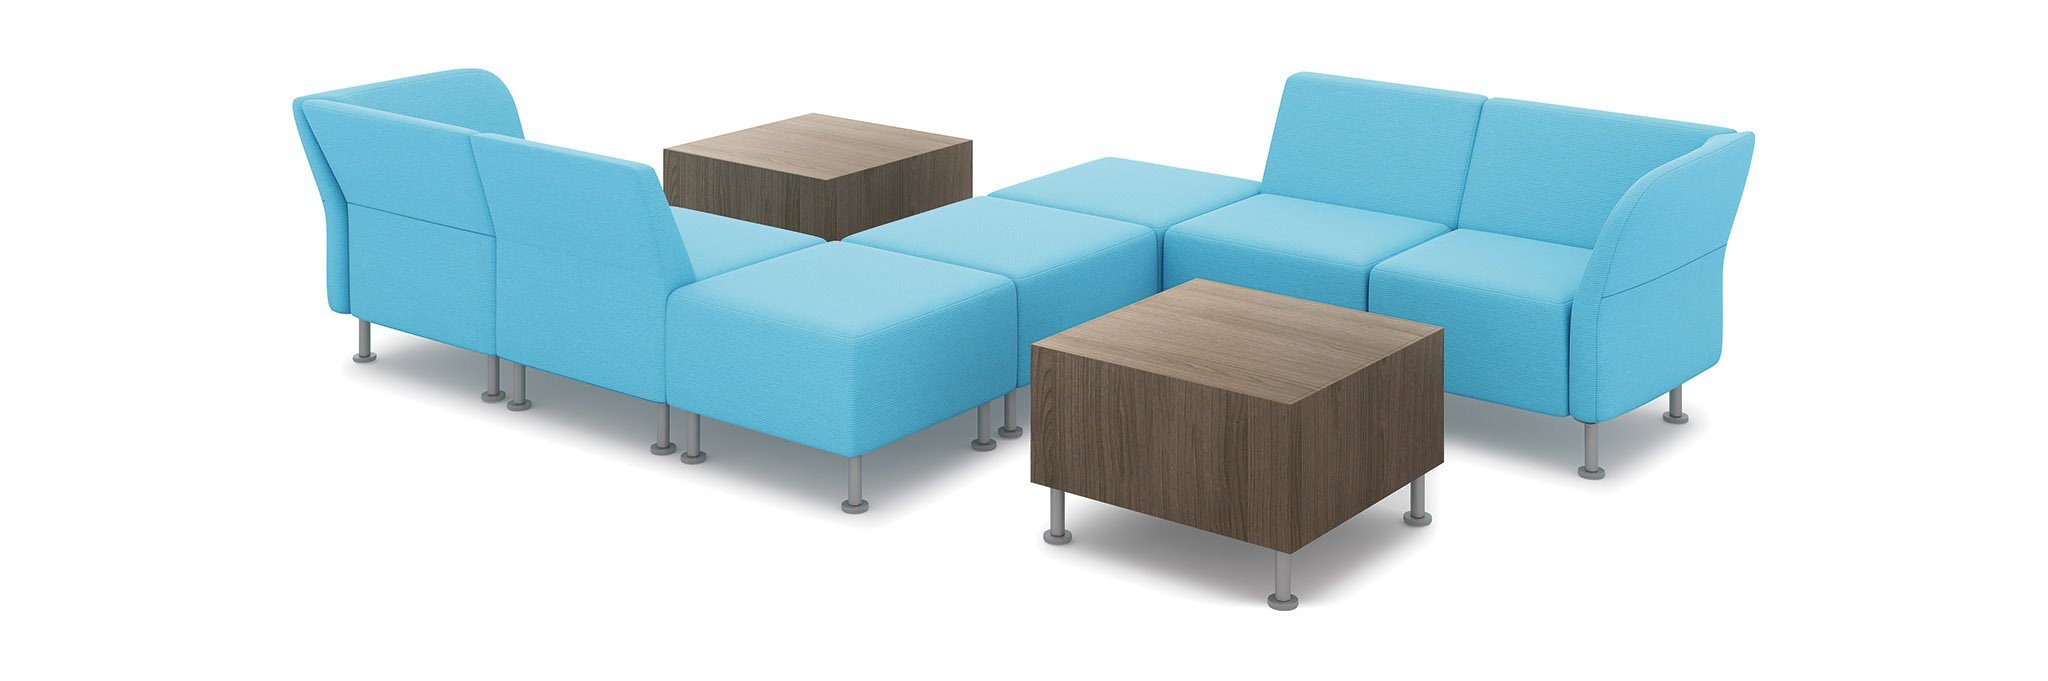 Lounge Chair Ottoman Square - Freedman's Office Furniture - Blue